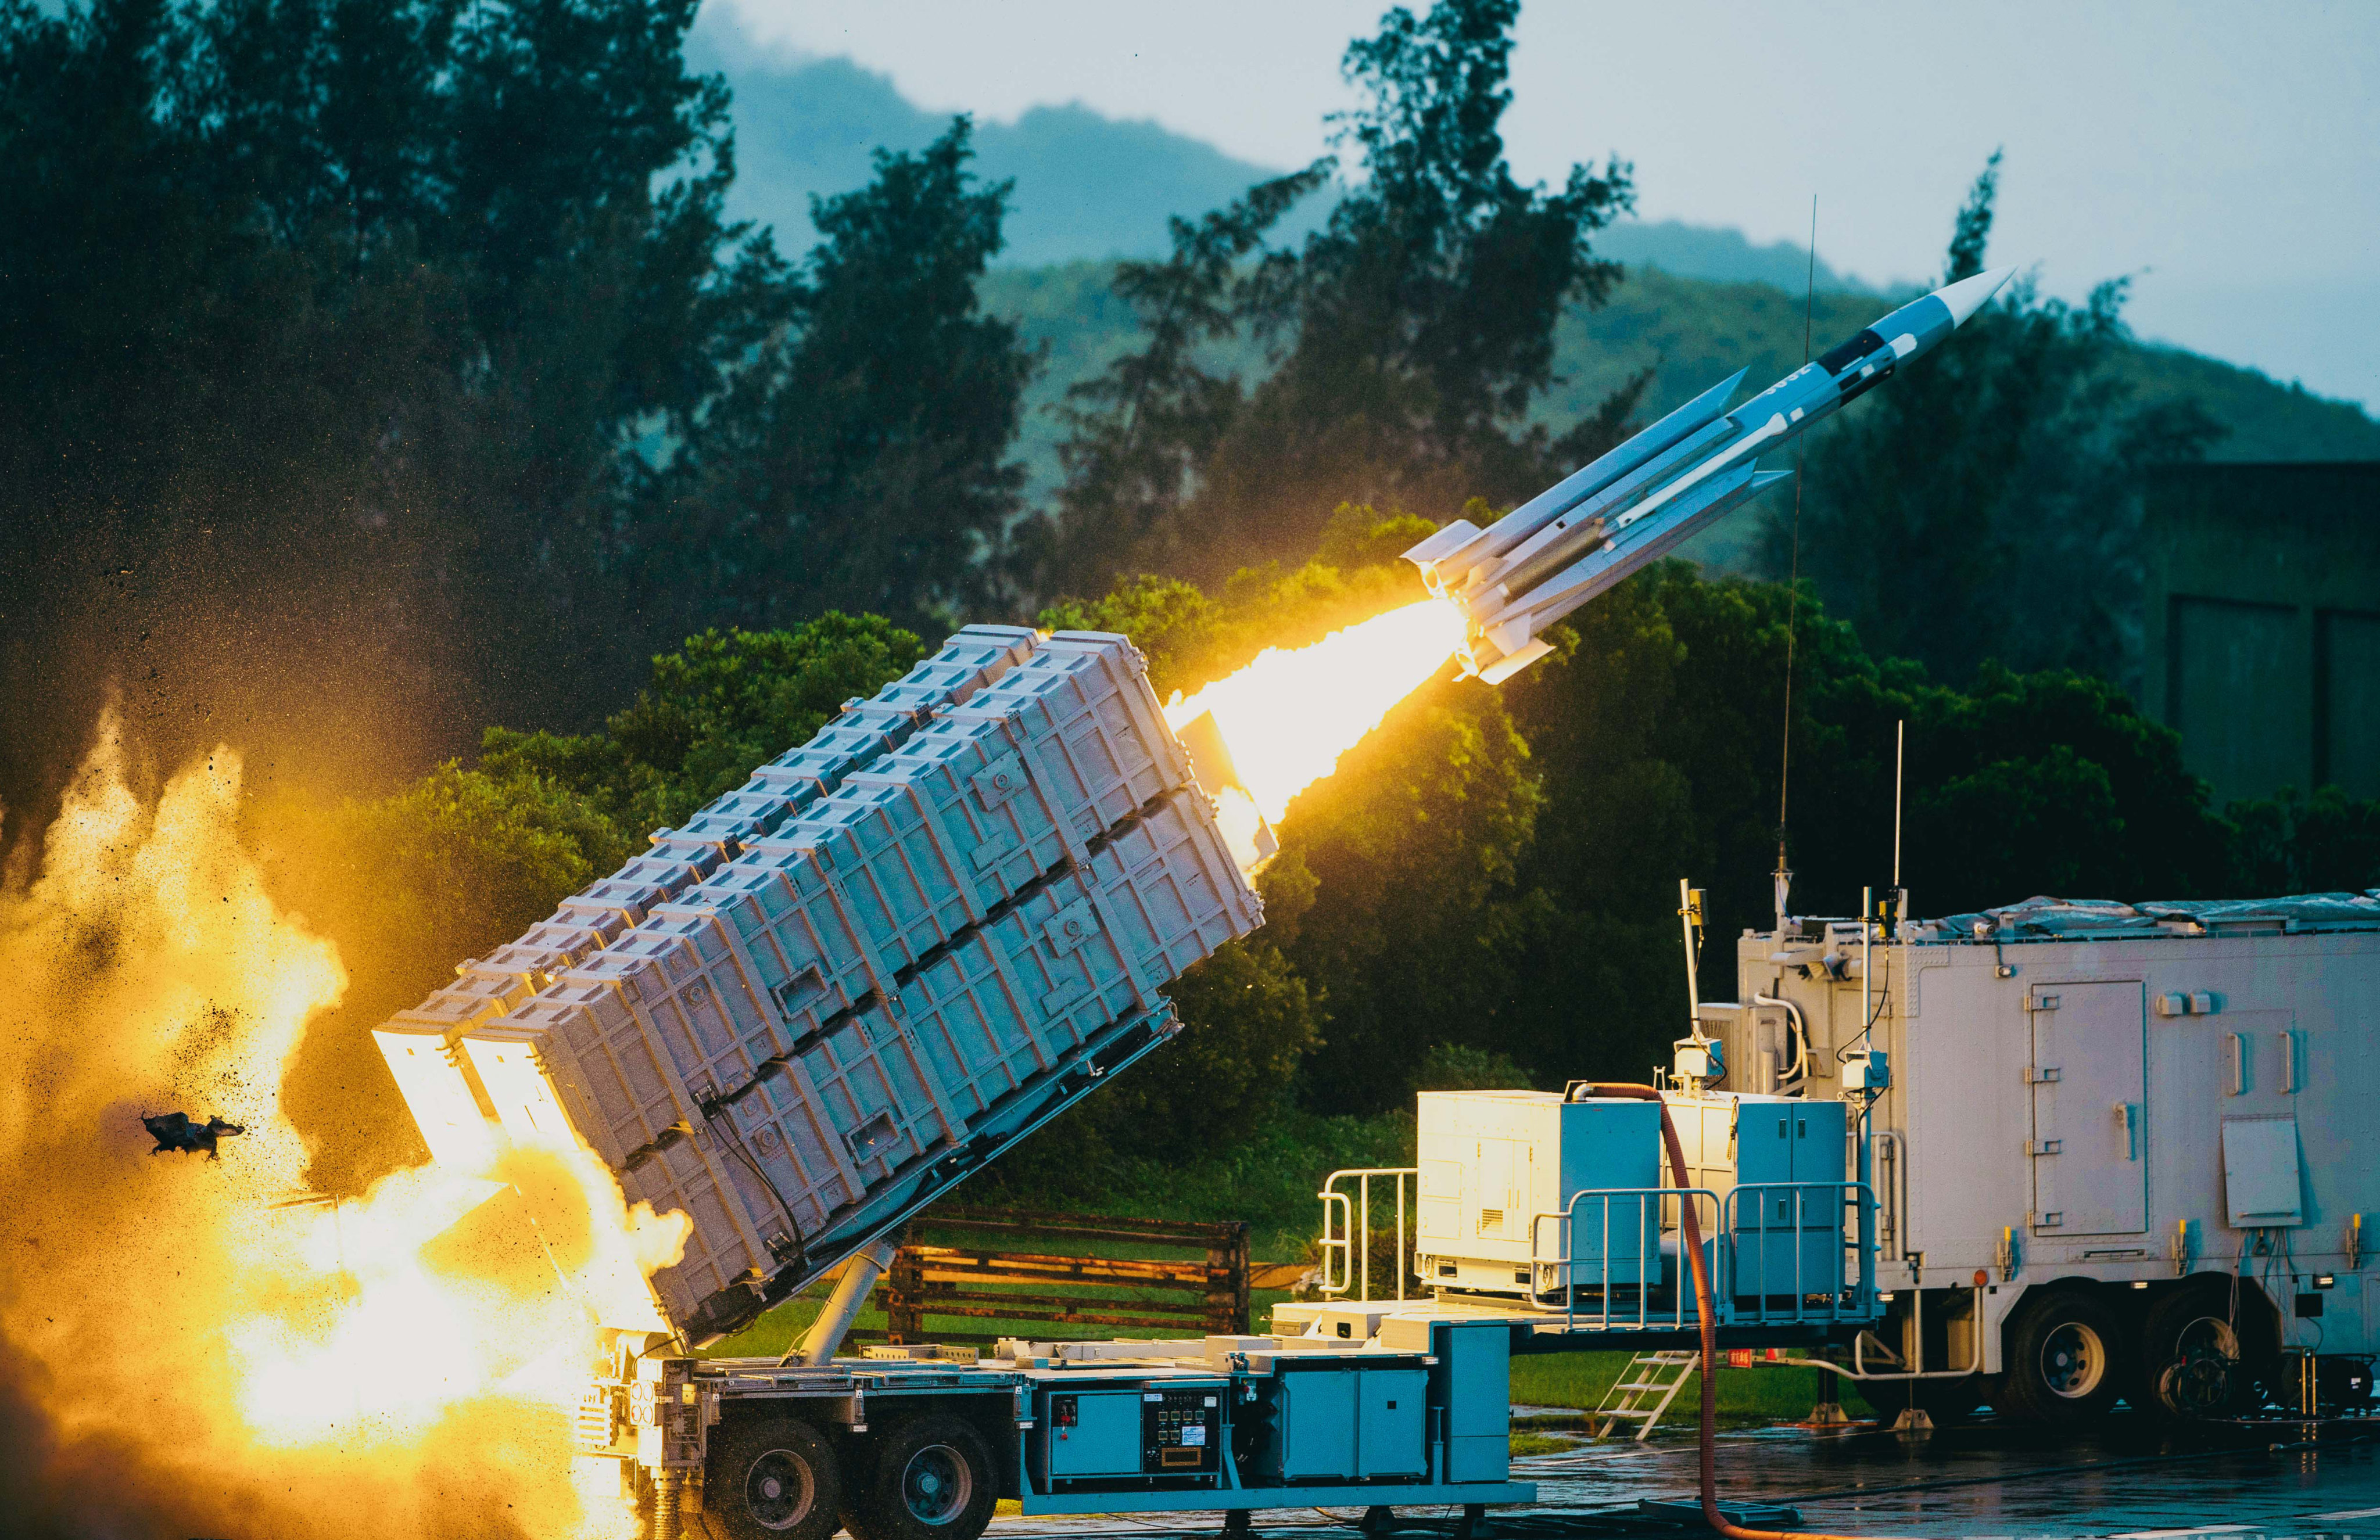 An article in a mainland Chinese military magazine says a key cruise missile in Taiwan’s arsenal has limited capabilities and is likely to be less precise and more prone to interference. Photo: Military News Agency